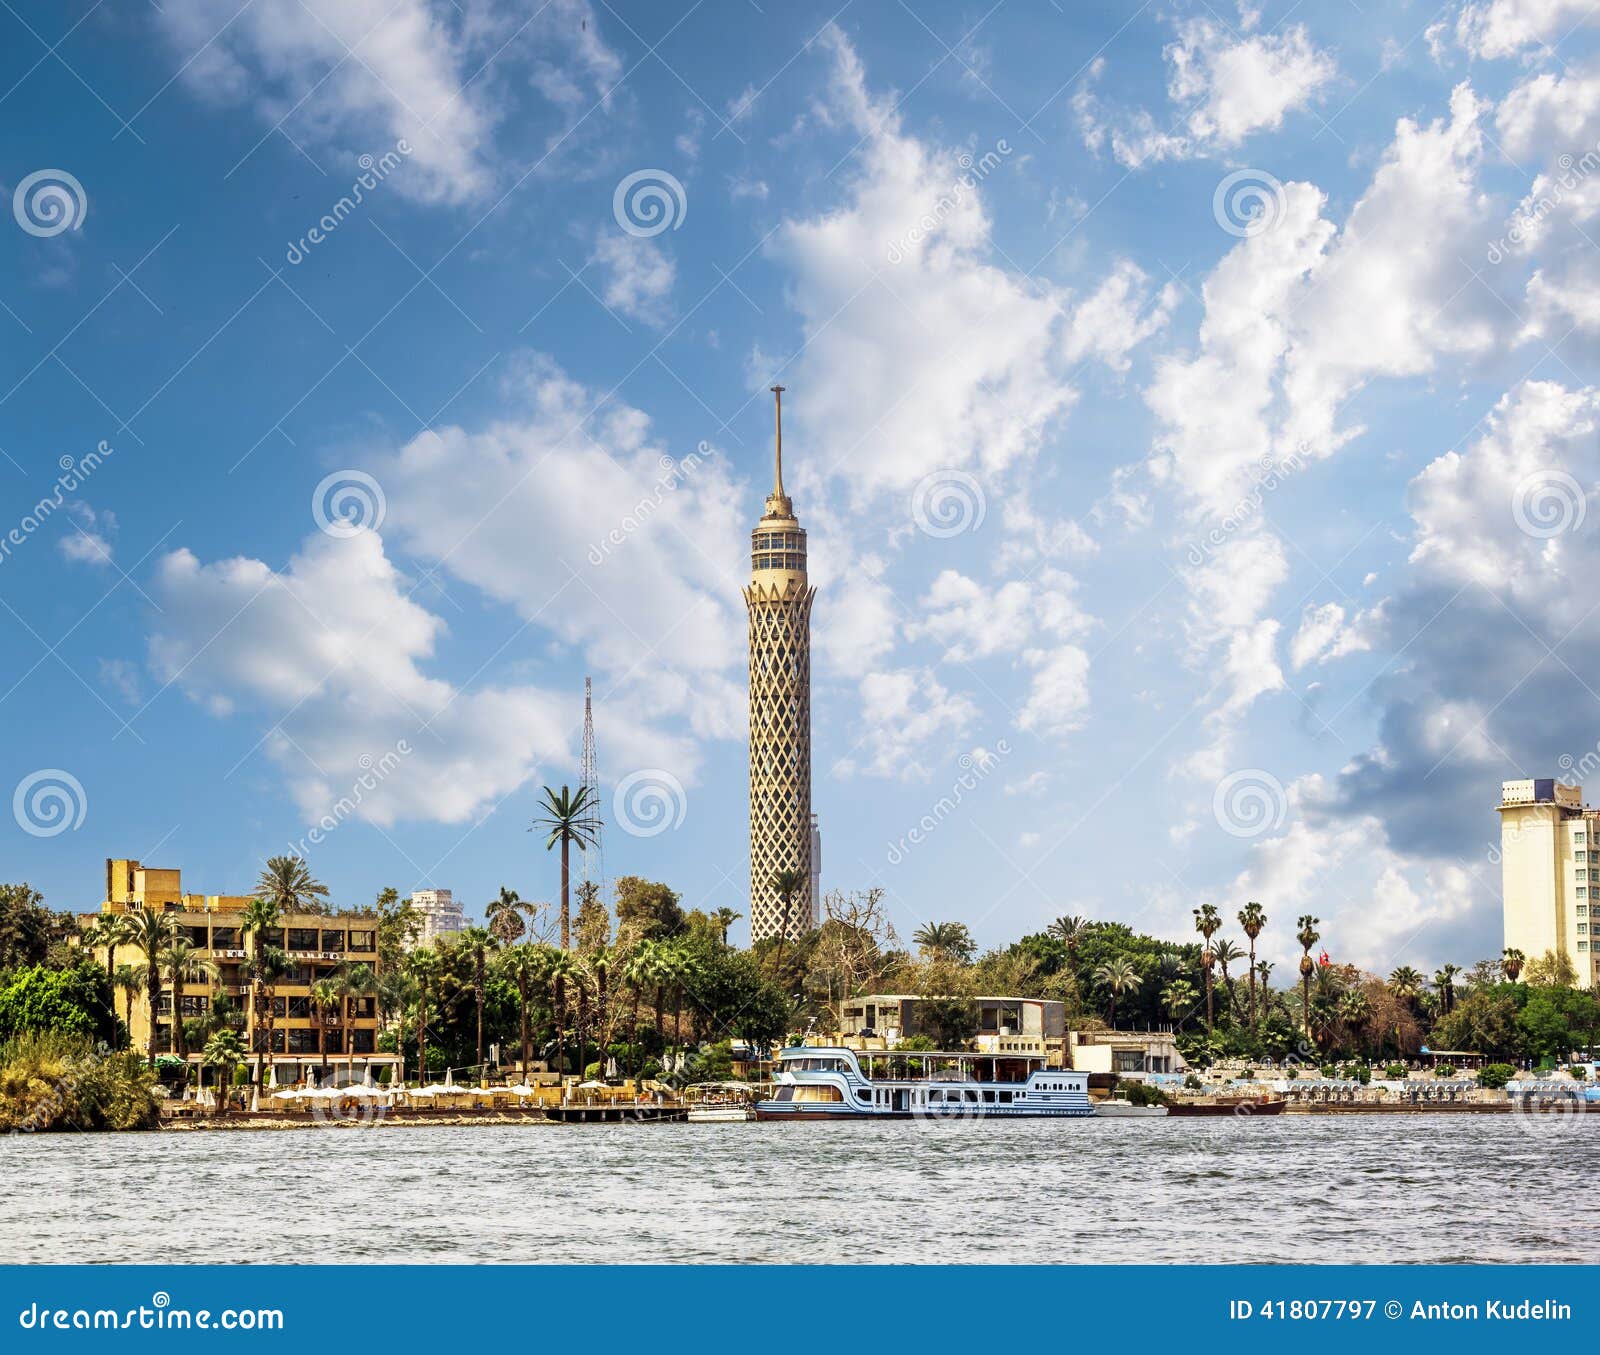 cairo tower, cairo on the nile in egypt